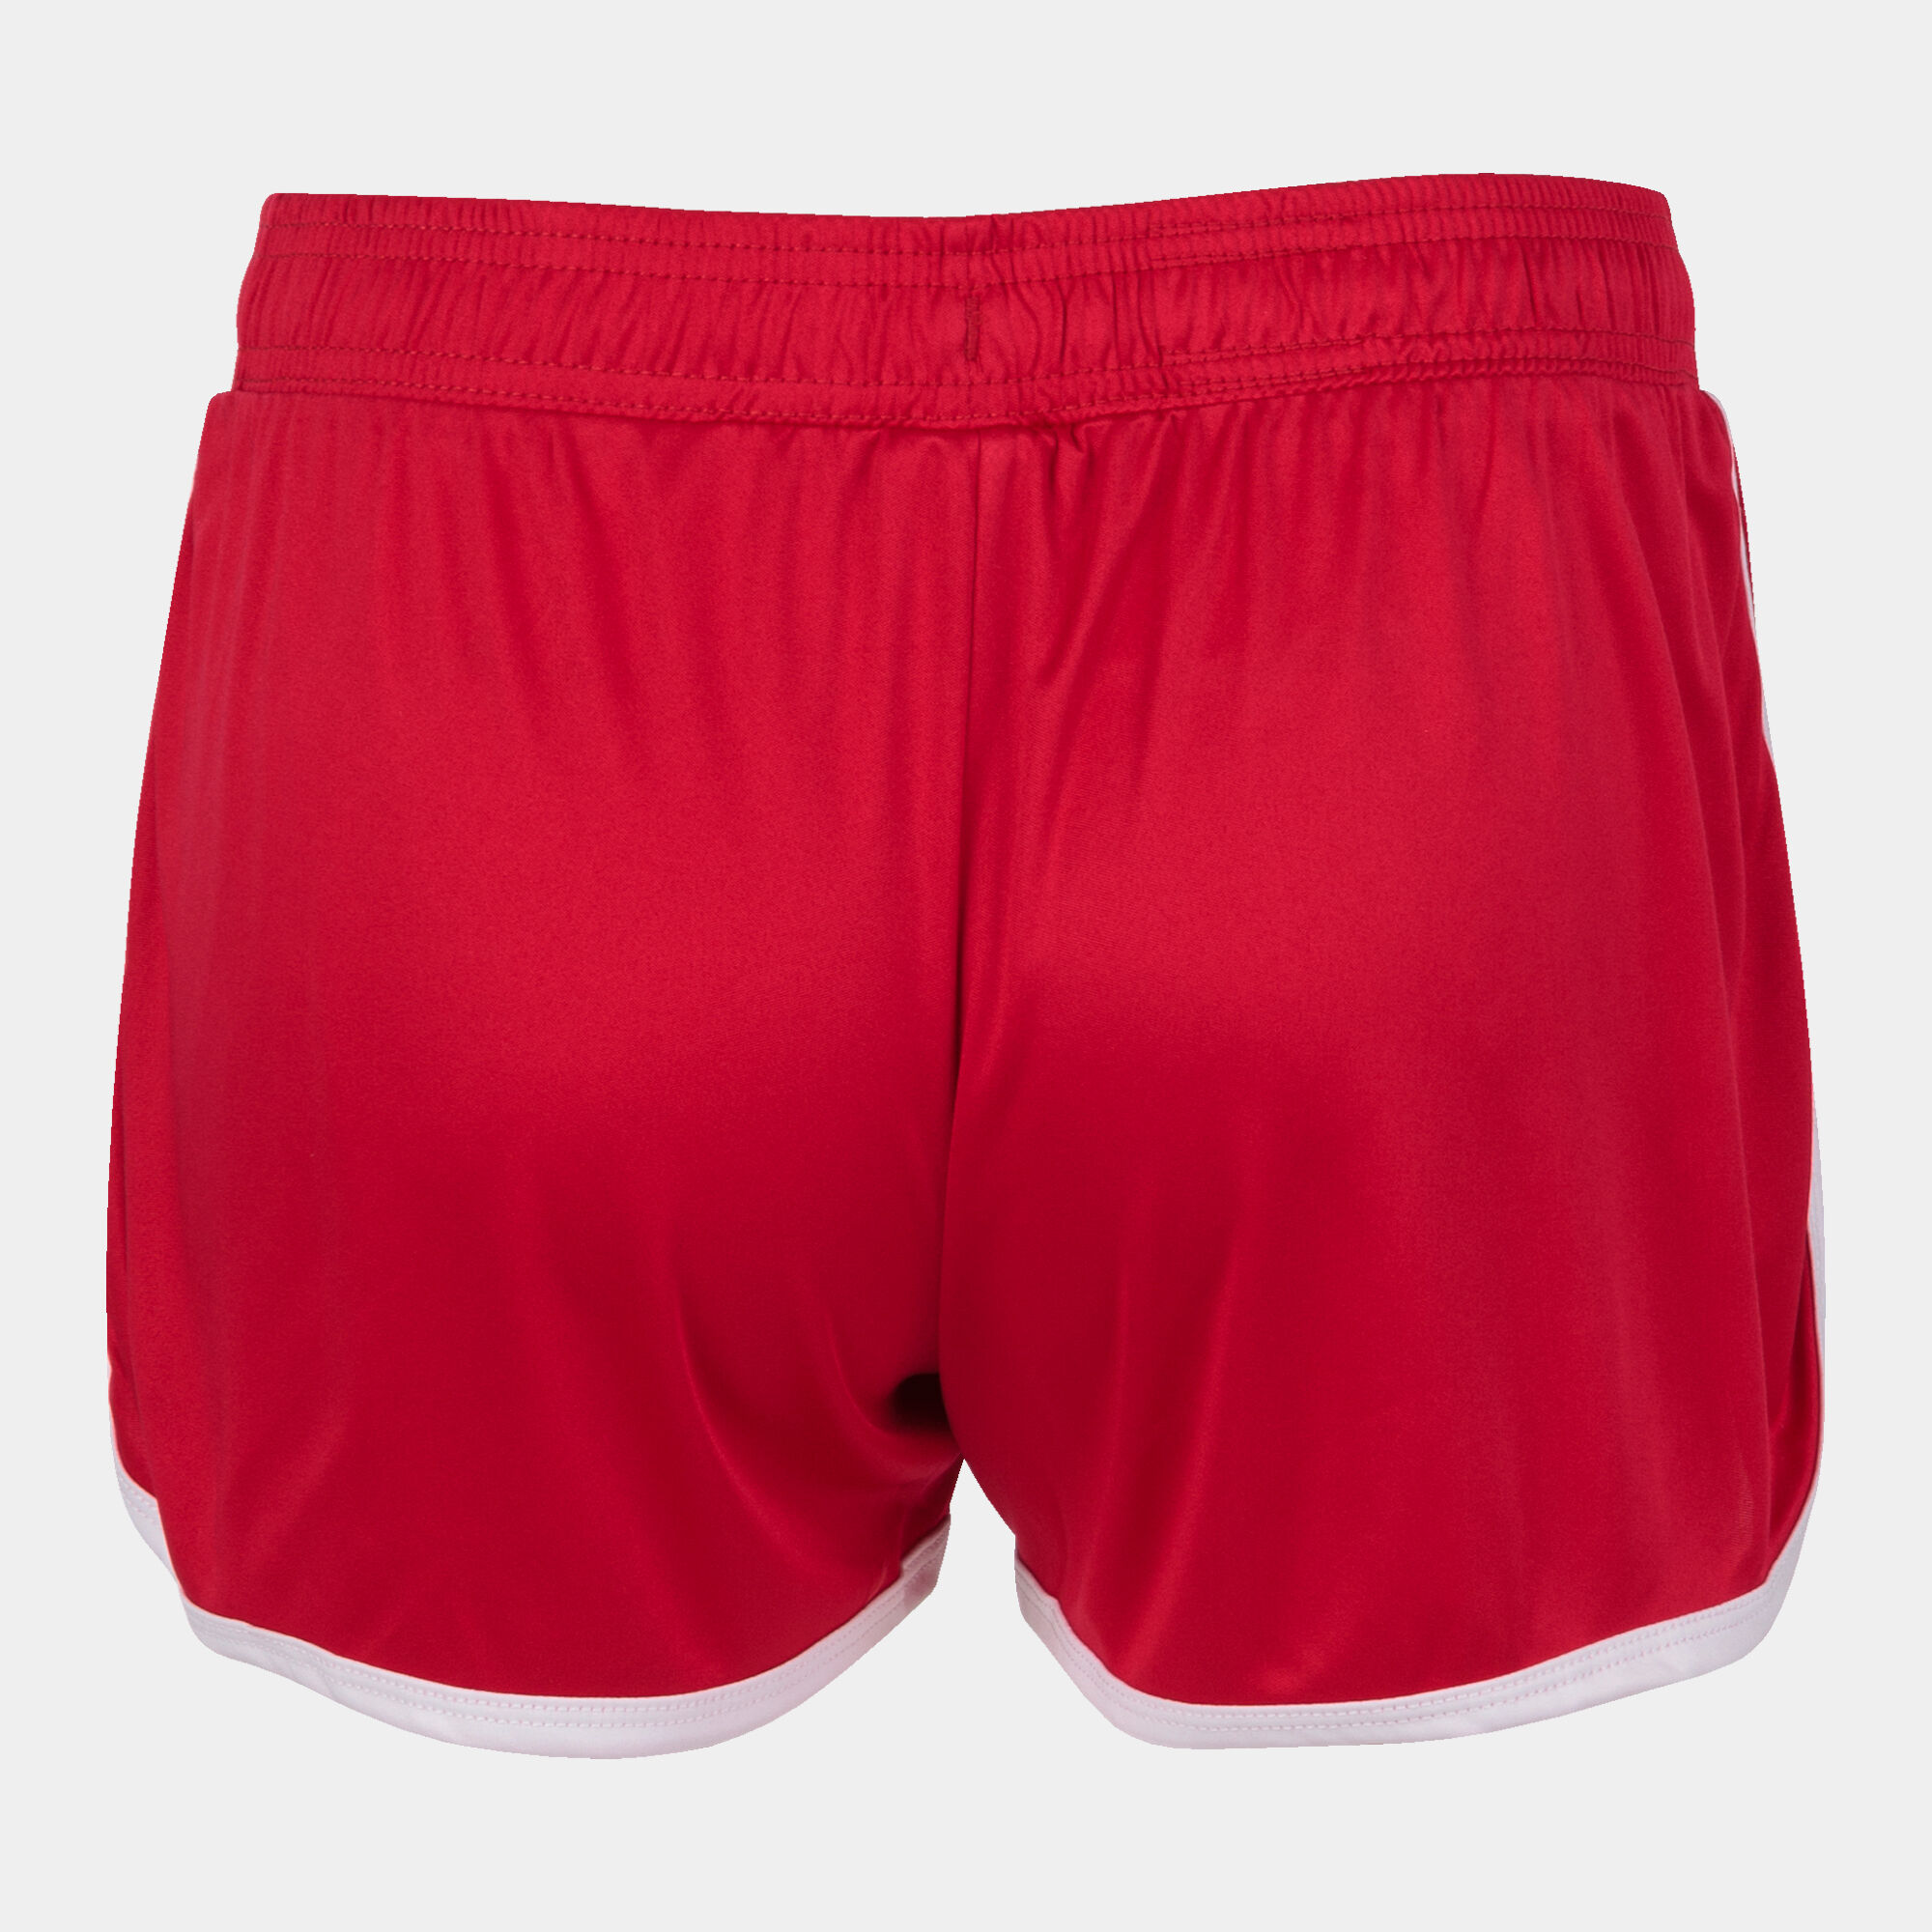 SHORTS WOMAN LEVANTE RED WHITE